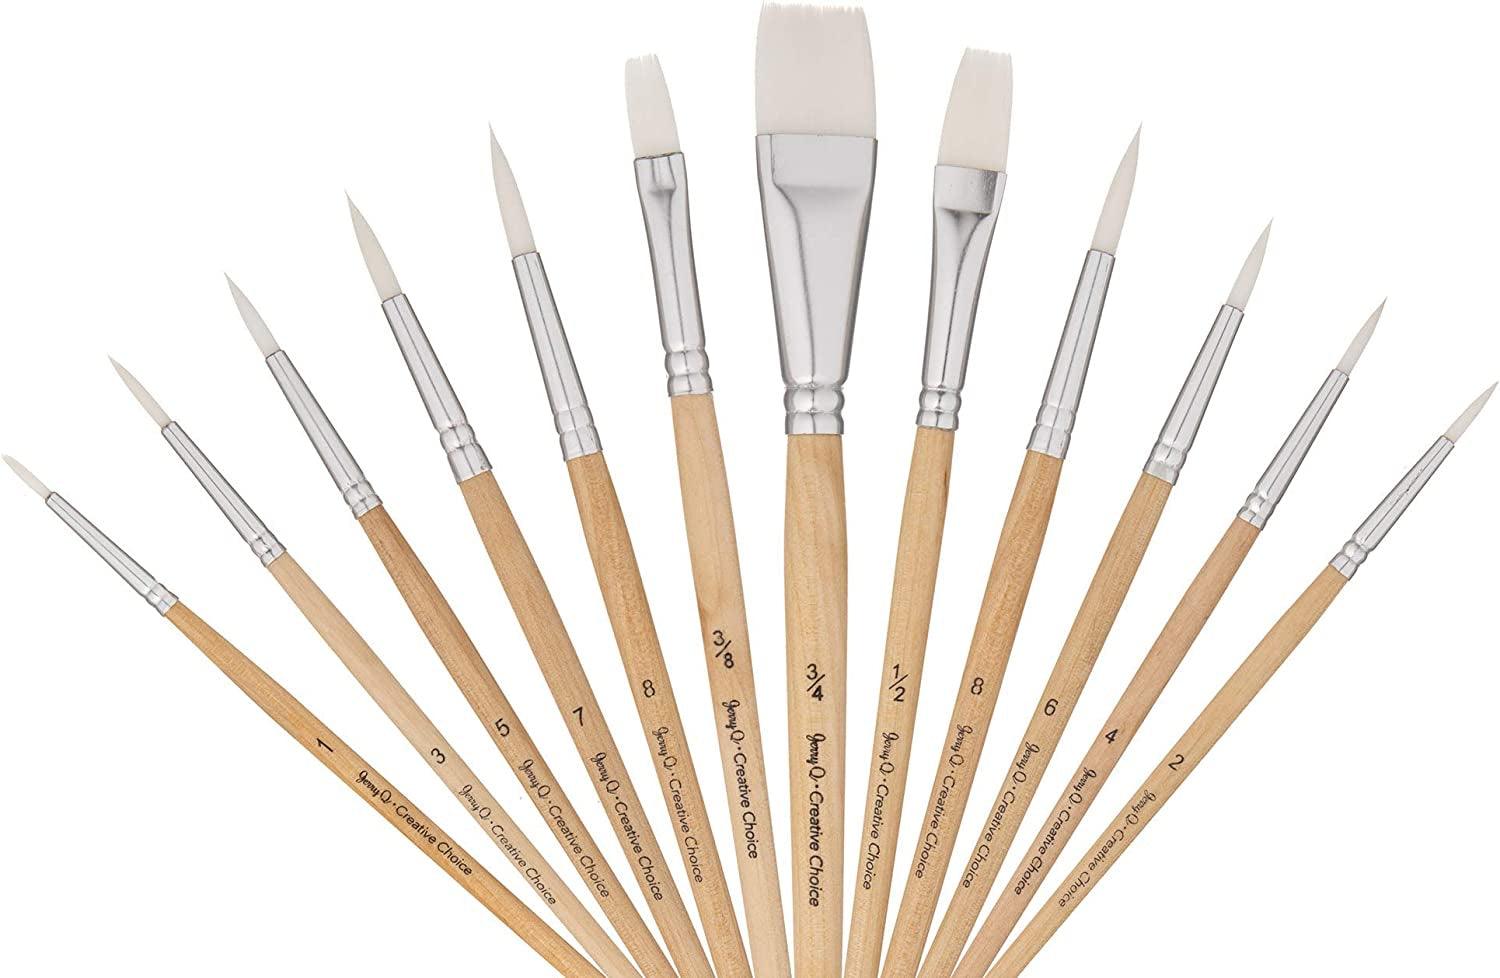 12 PC White Synthetic Hair round and Flat Paint Brush Set with Short Wood Handle for Acrylic, Watercolor - WoodArtSupply